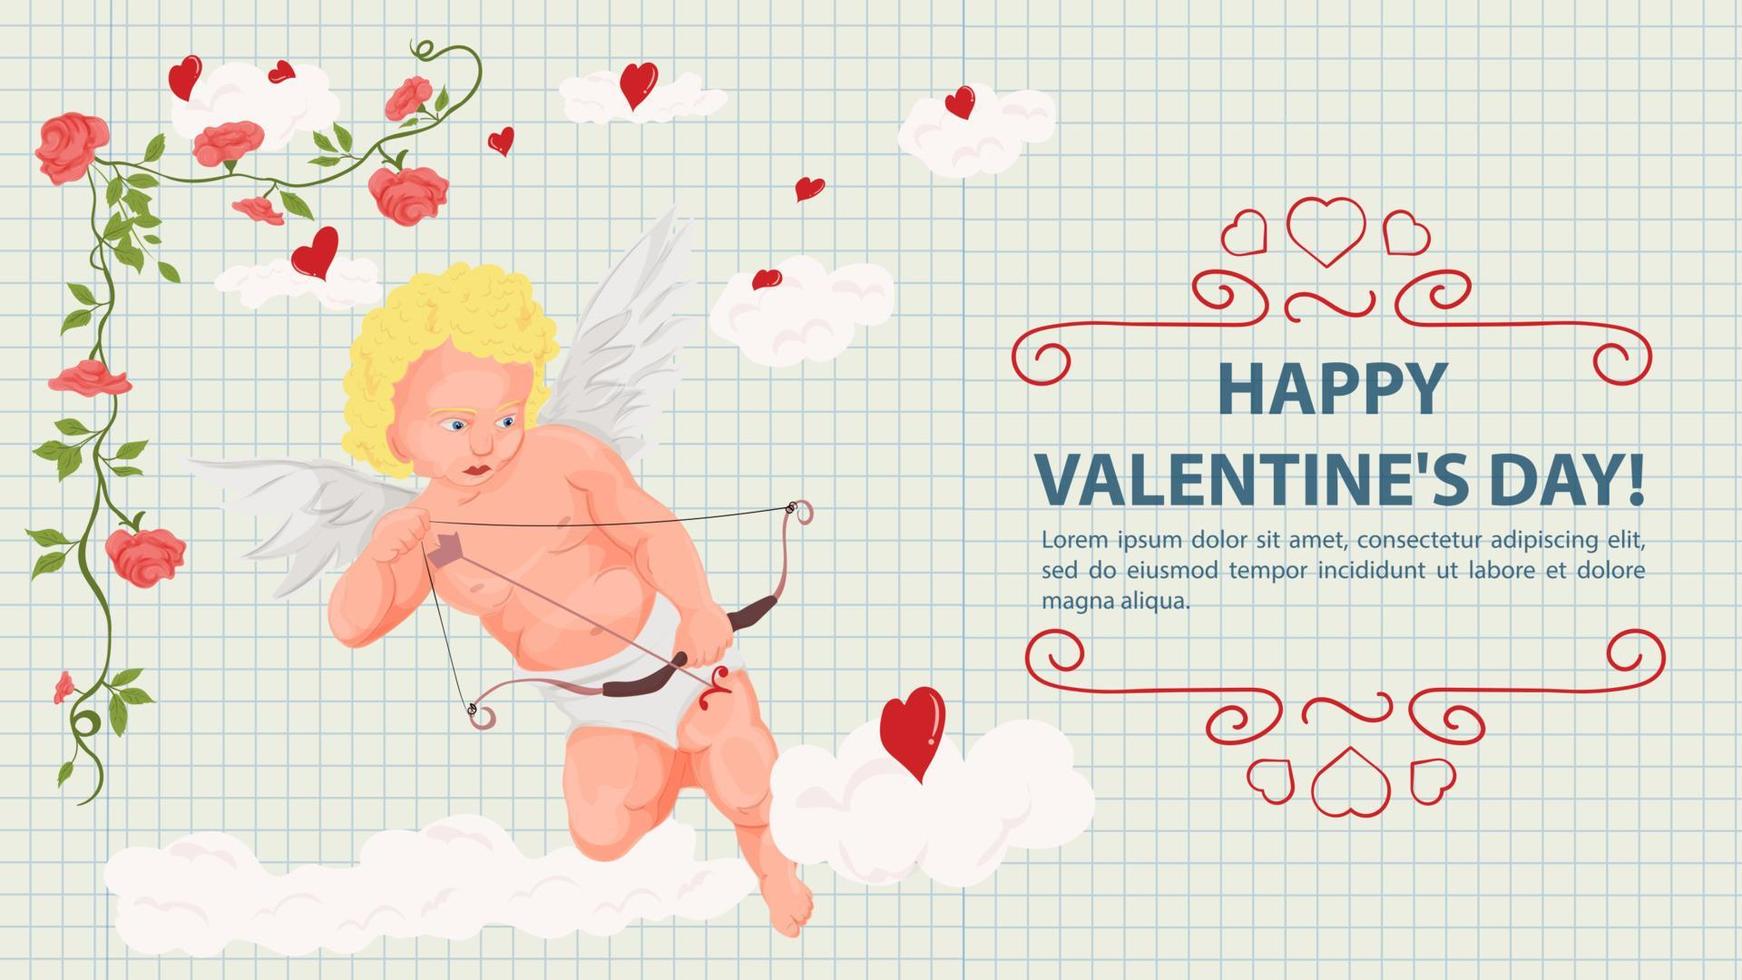 Illustration in a flat style for the Valentines Day holiday flower frame cupid on clouds aiming a bow background notebook sheet in a cage vector